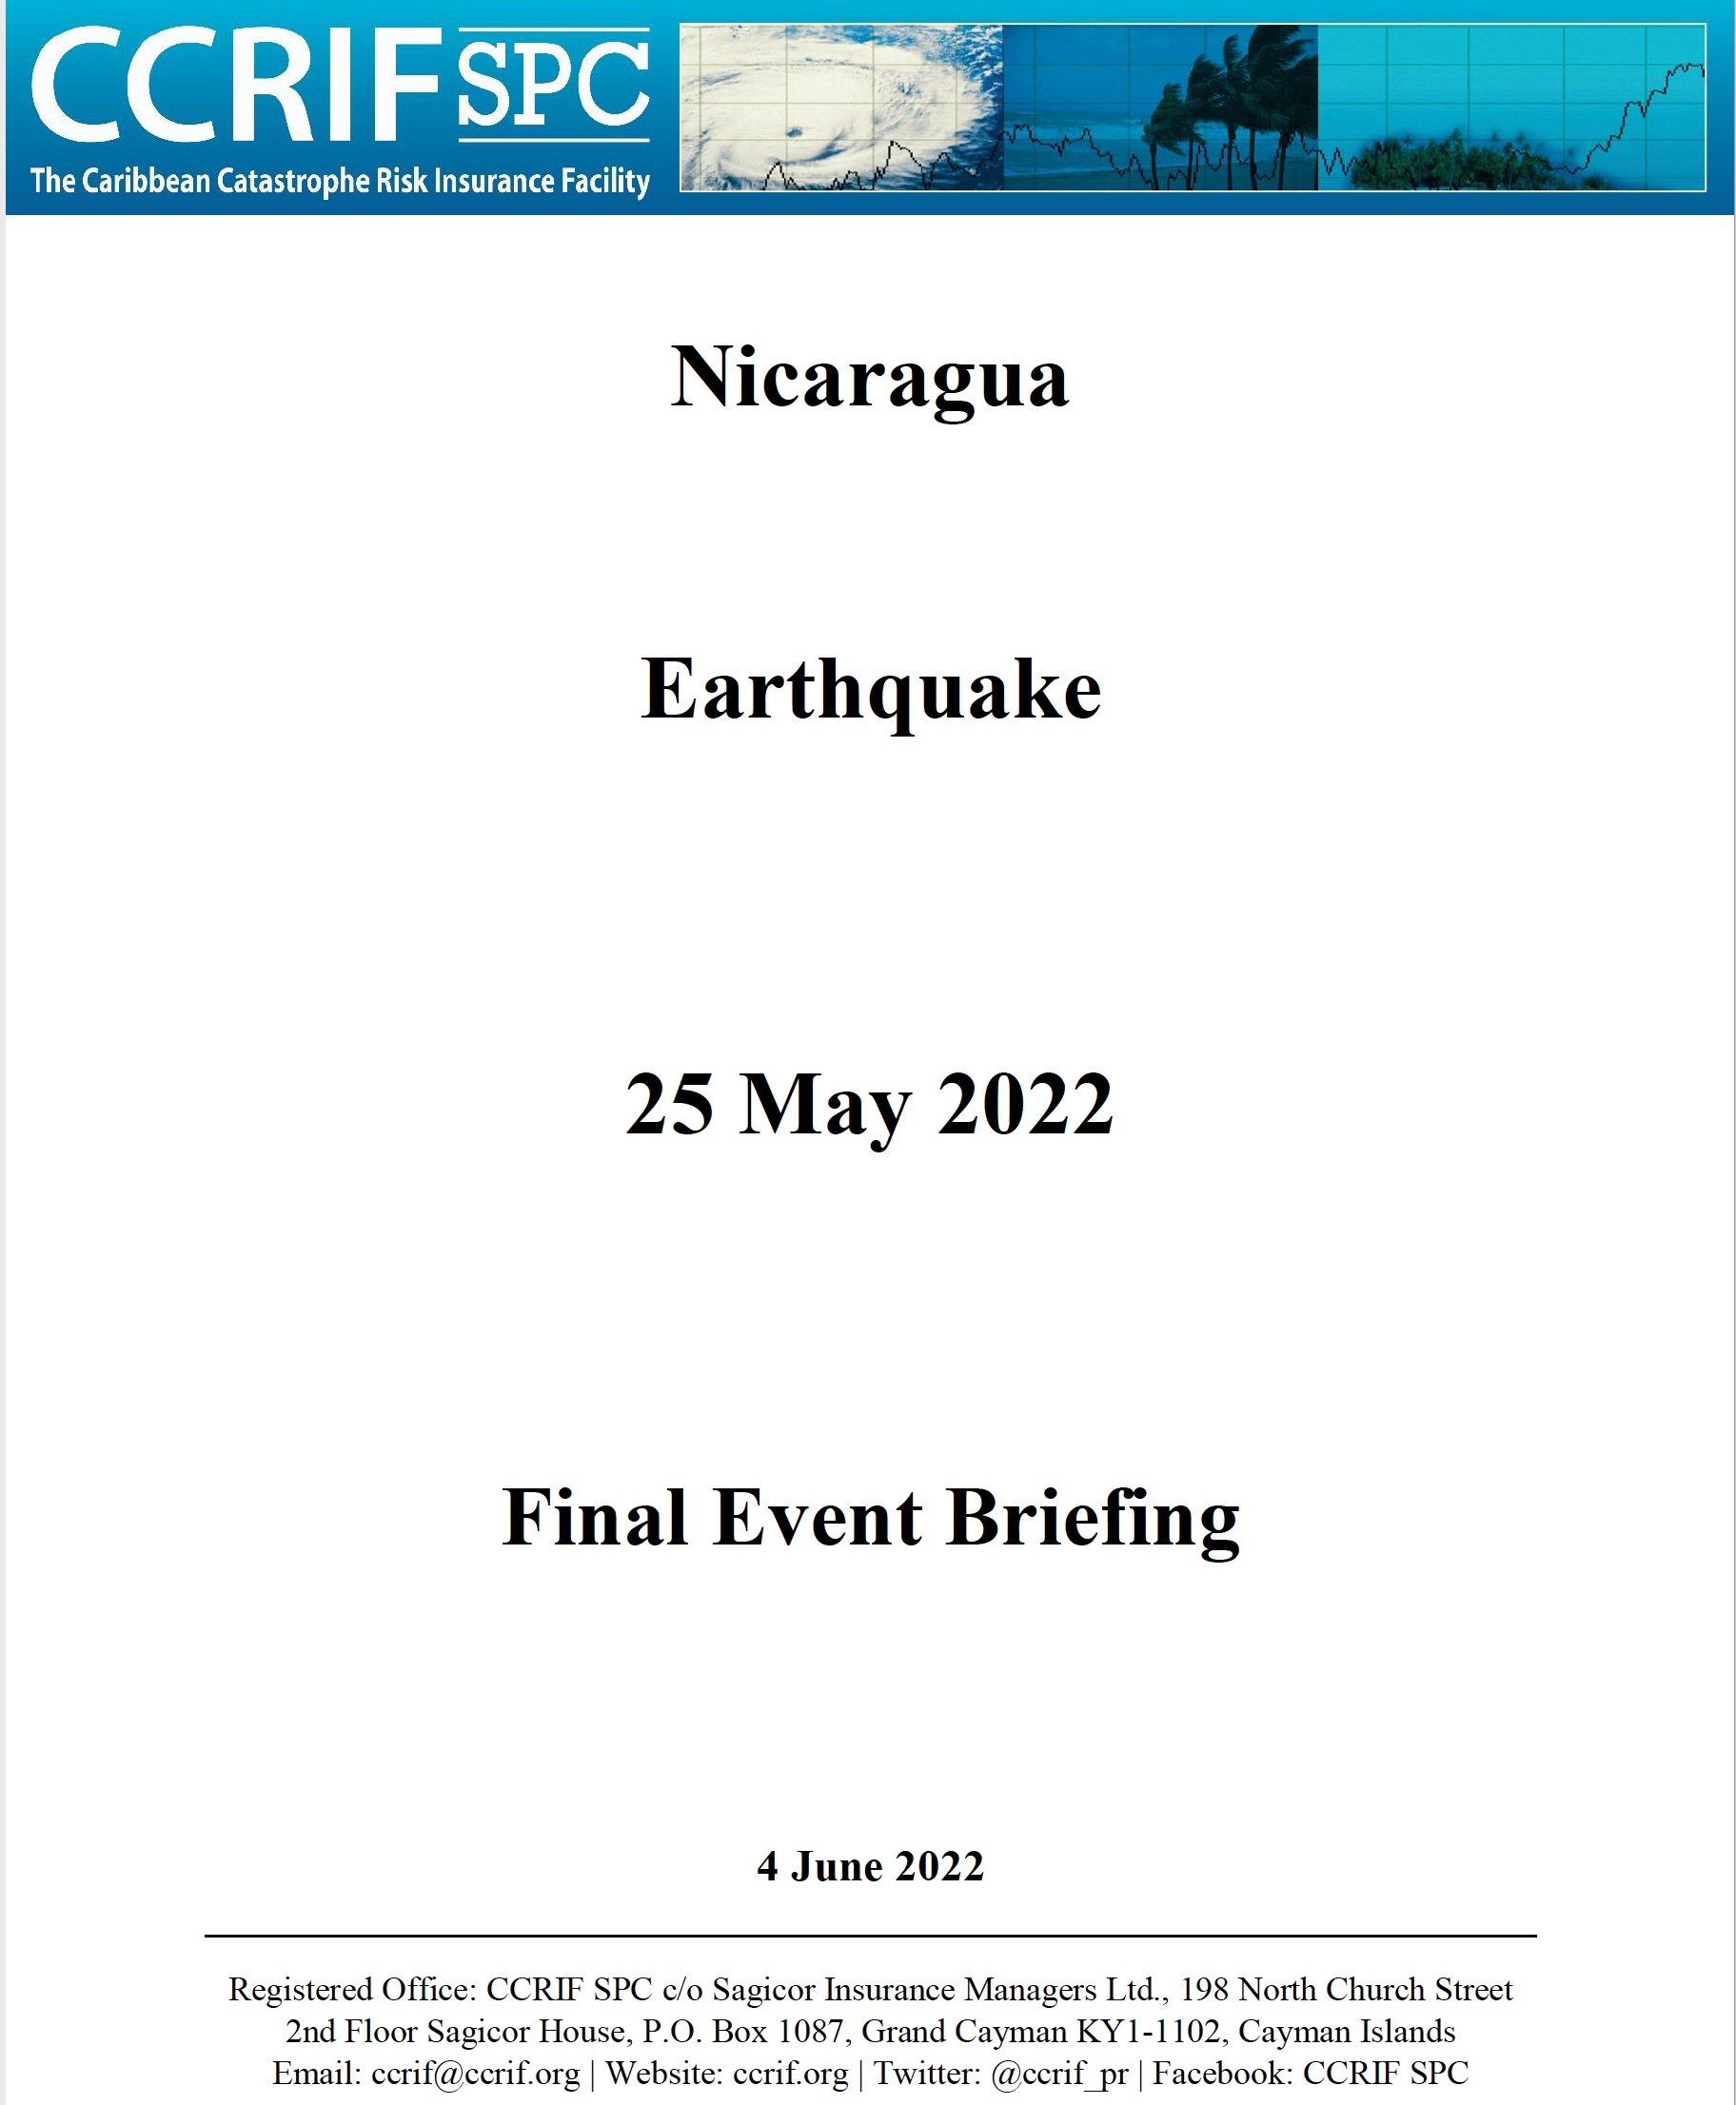 Final Event Briefing - Earthquake - Nicaragua - May 25 2022